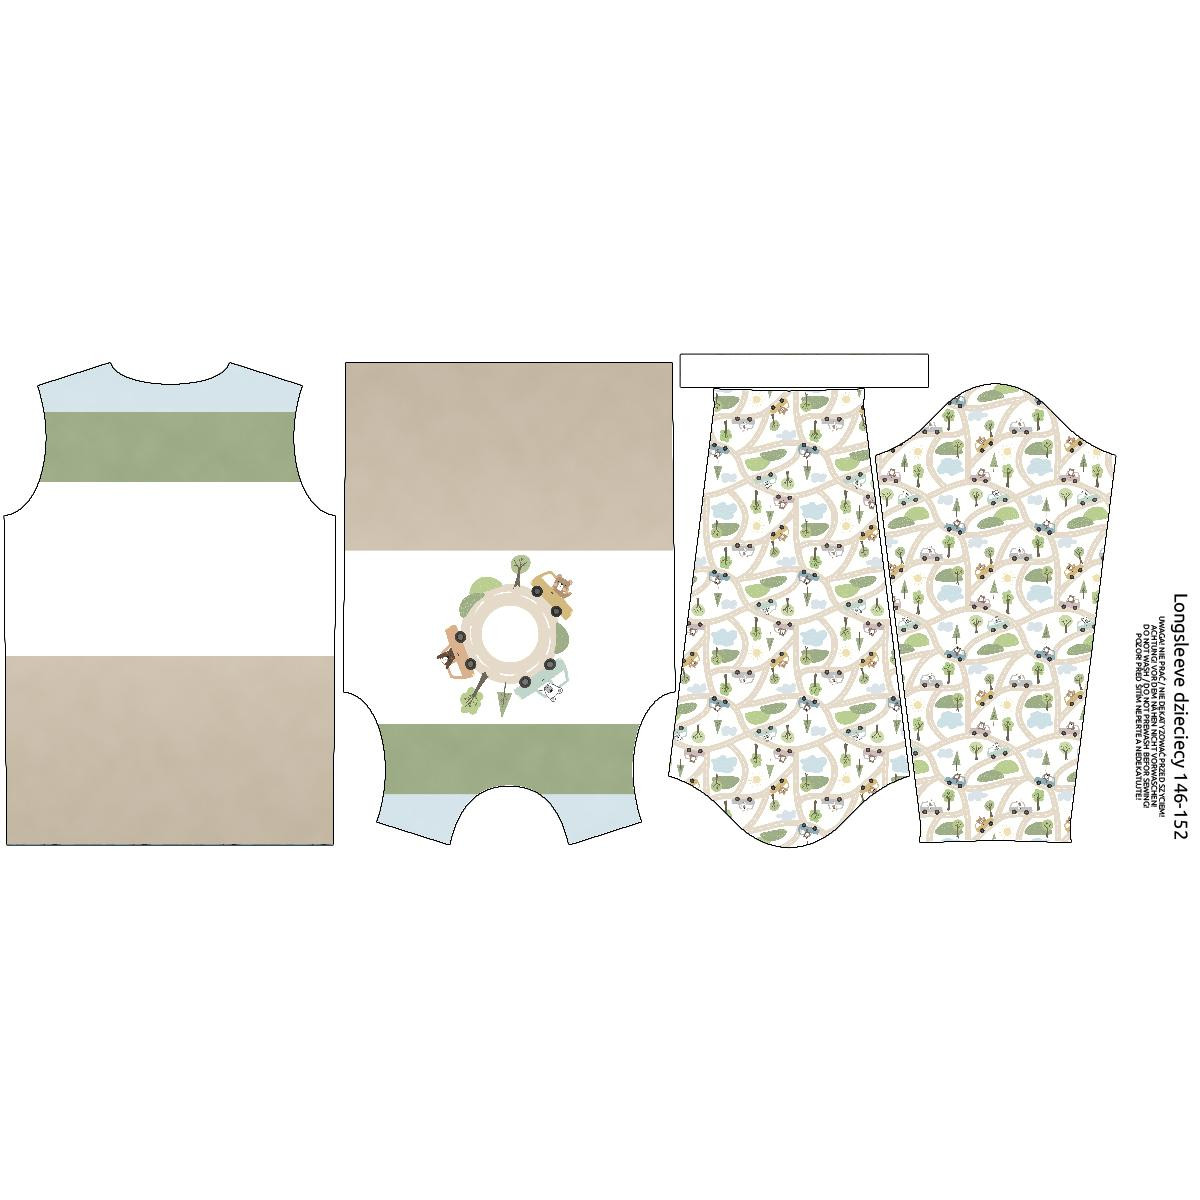 Longsleeve - COLORFUL CARS / roundabout (CITY BEARS) - sewing set